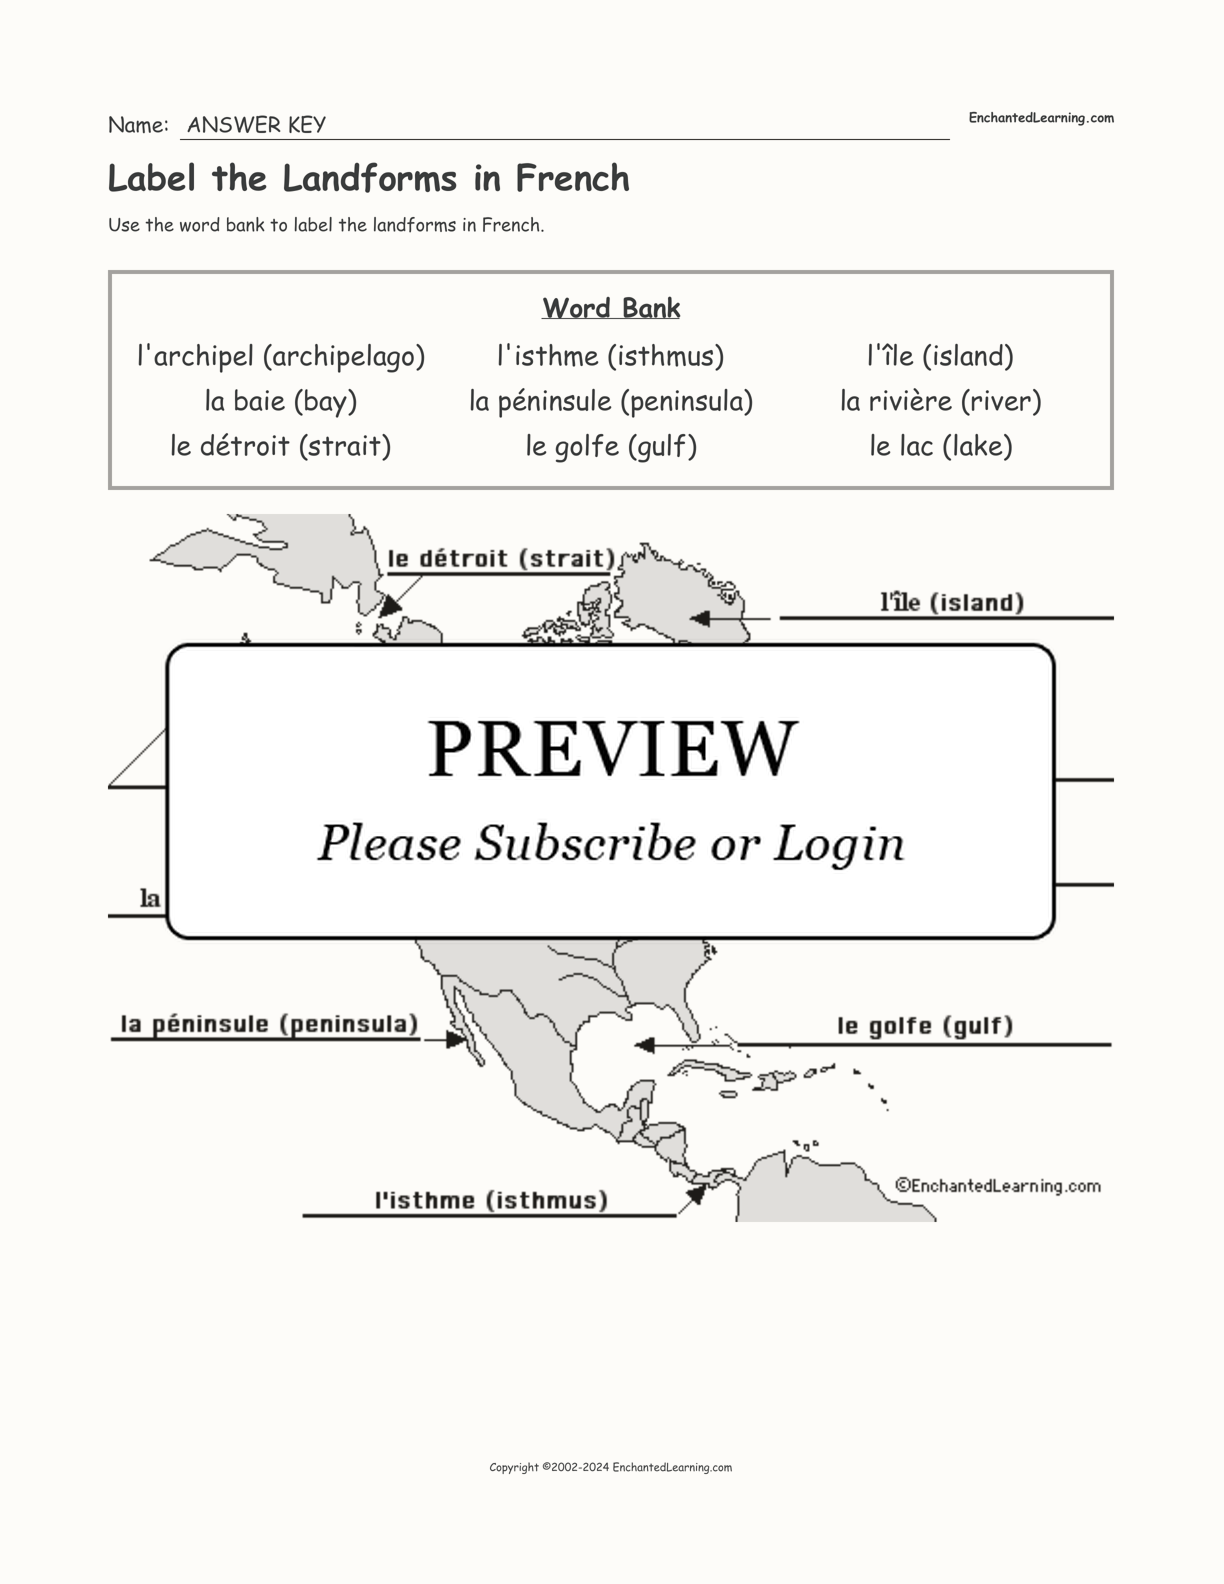 Label the Landforms in French interactive worksheet page 2